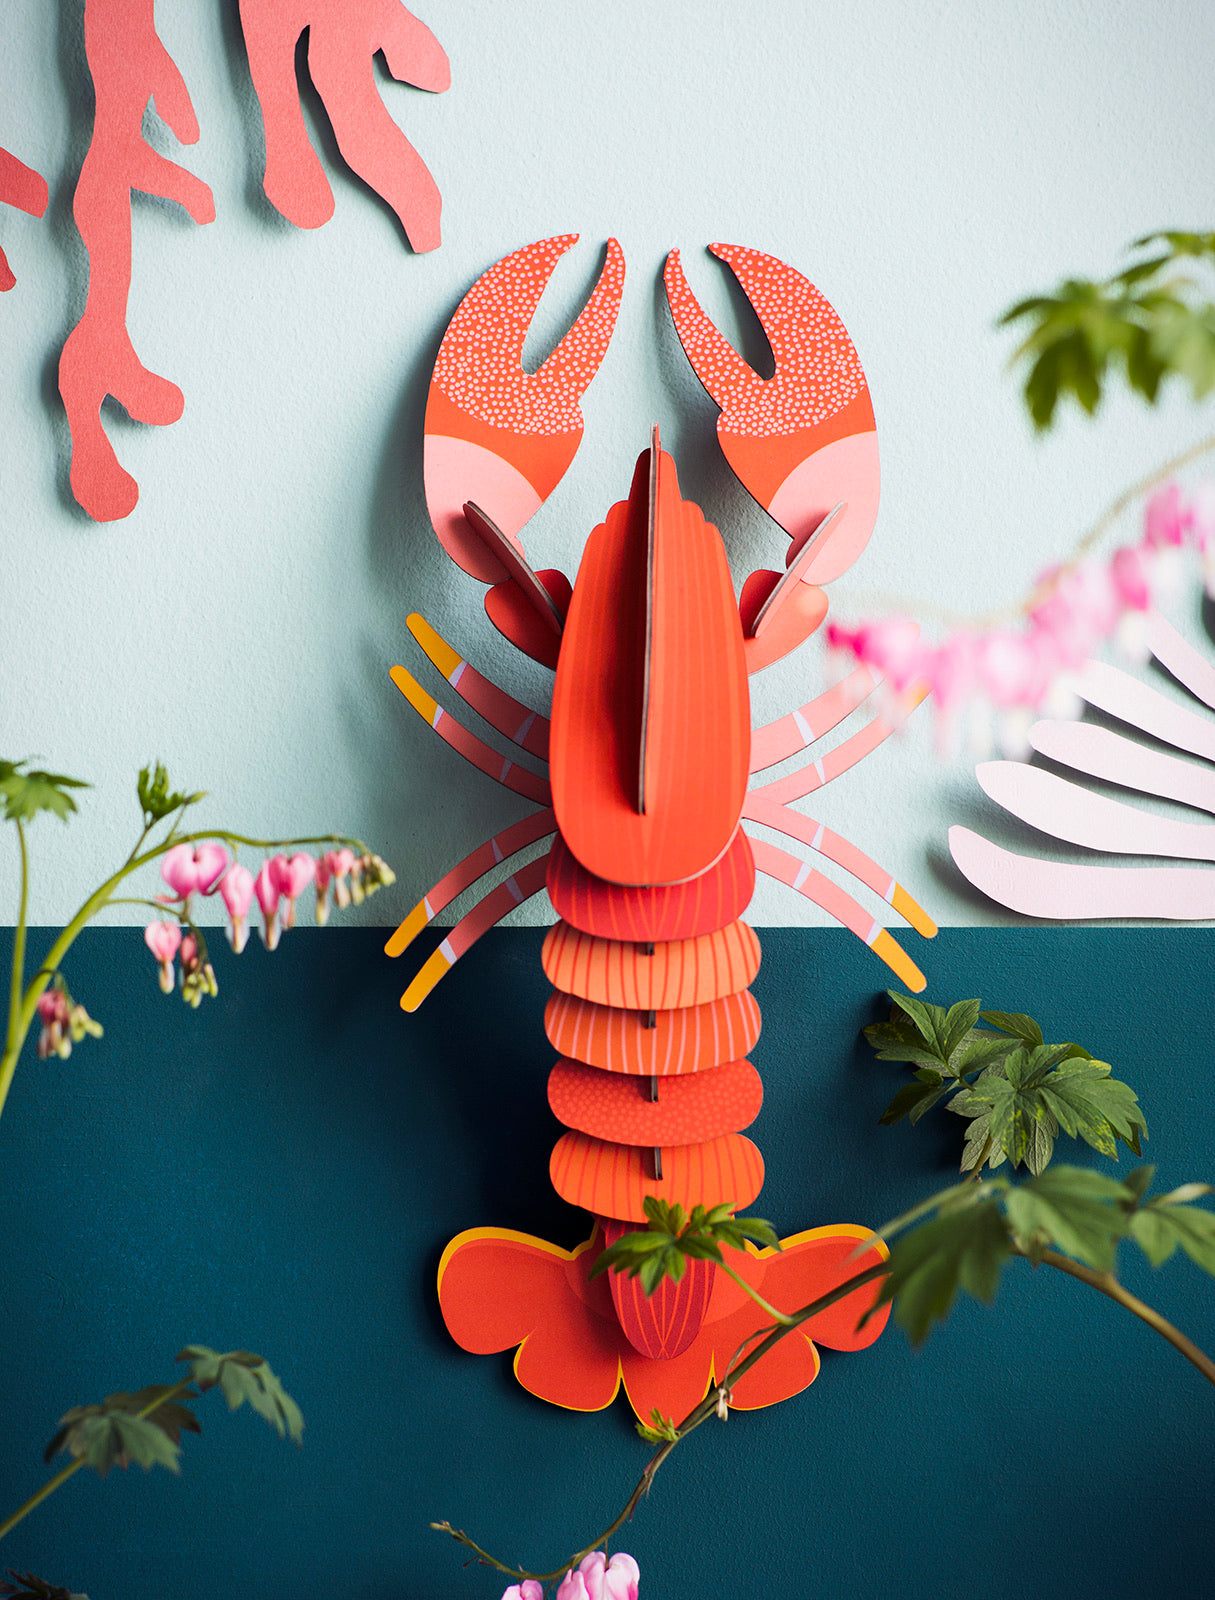 Studio Roof Wall Decoration | Giant Red Lobster - Moo Like a Monkey